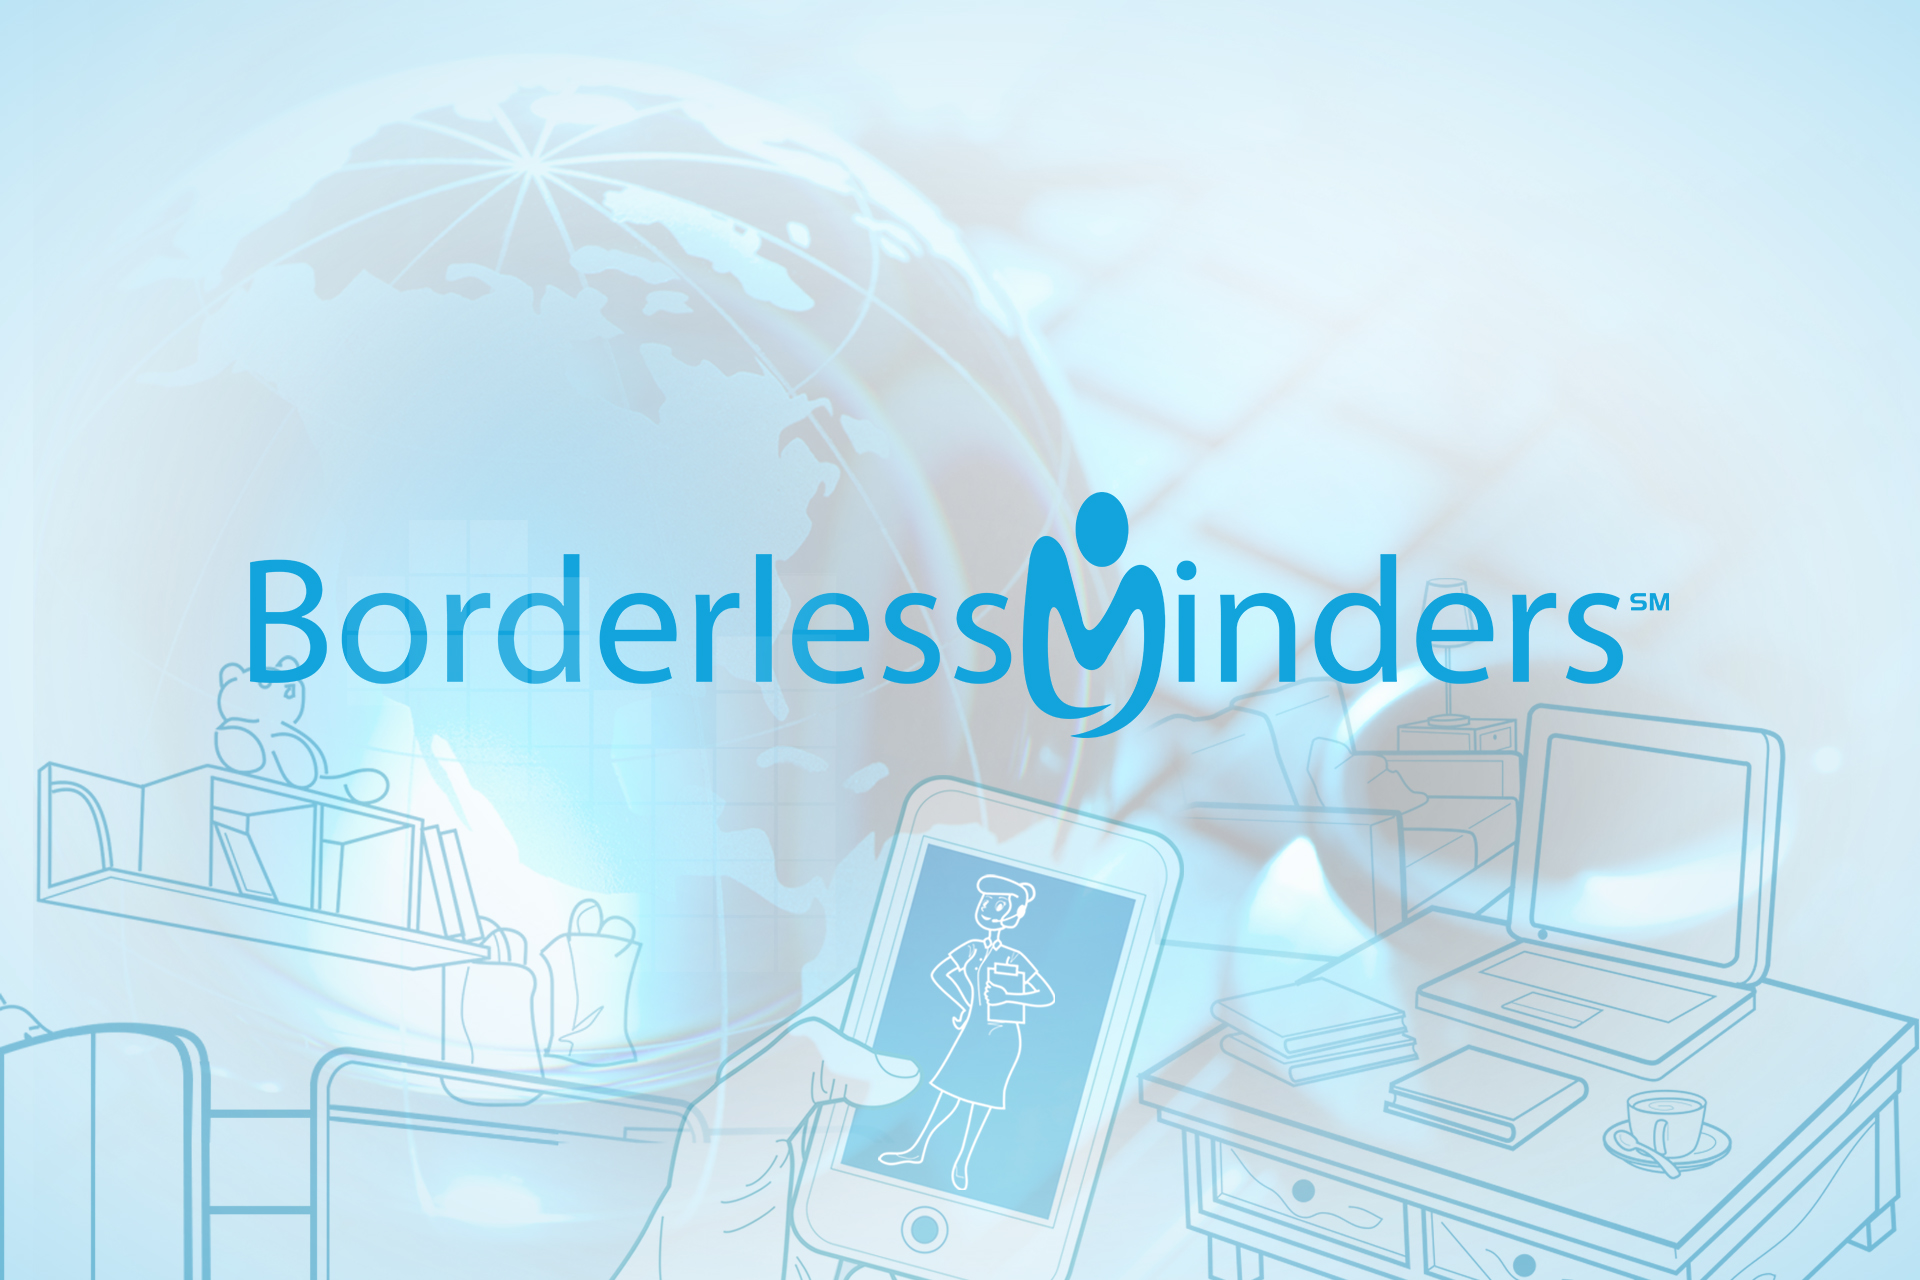 What Can You Expect from a Borderless Minder?